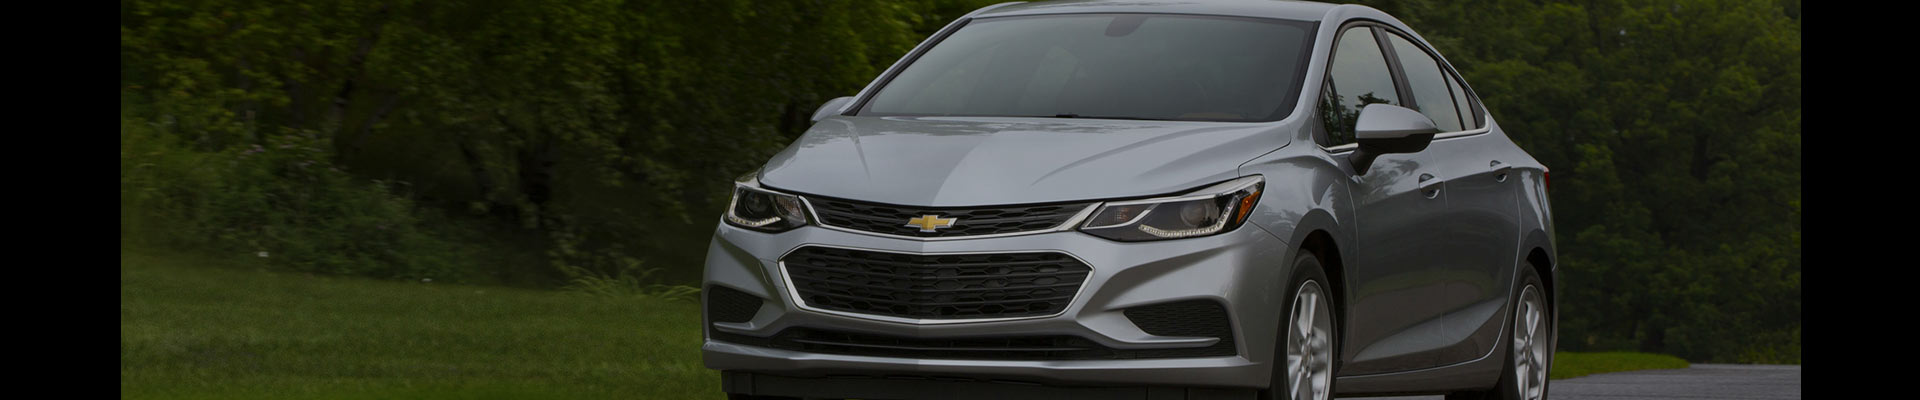 Shop Replacement and OEM Chevrolet Cruze Parts with Discounted Price on the Net